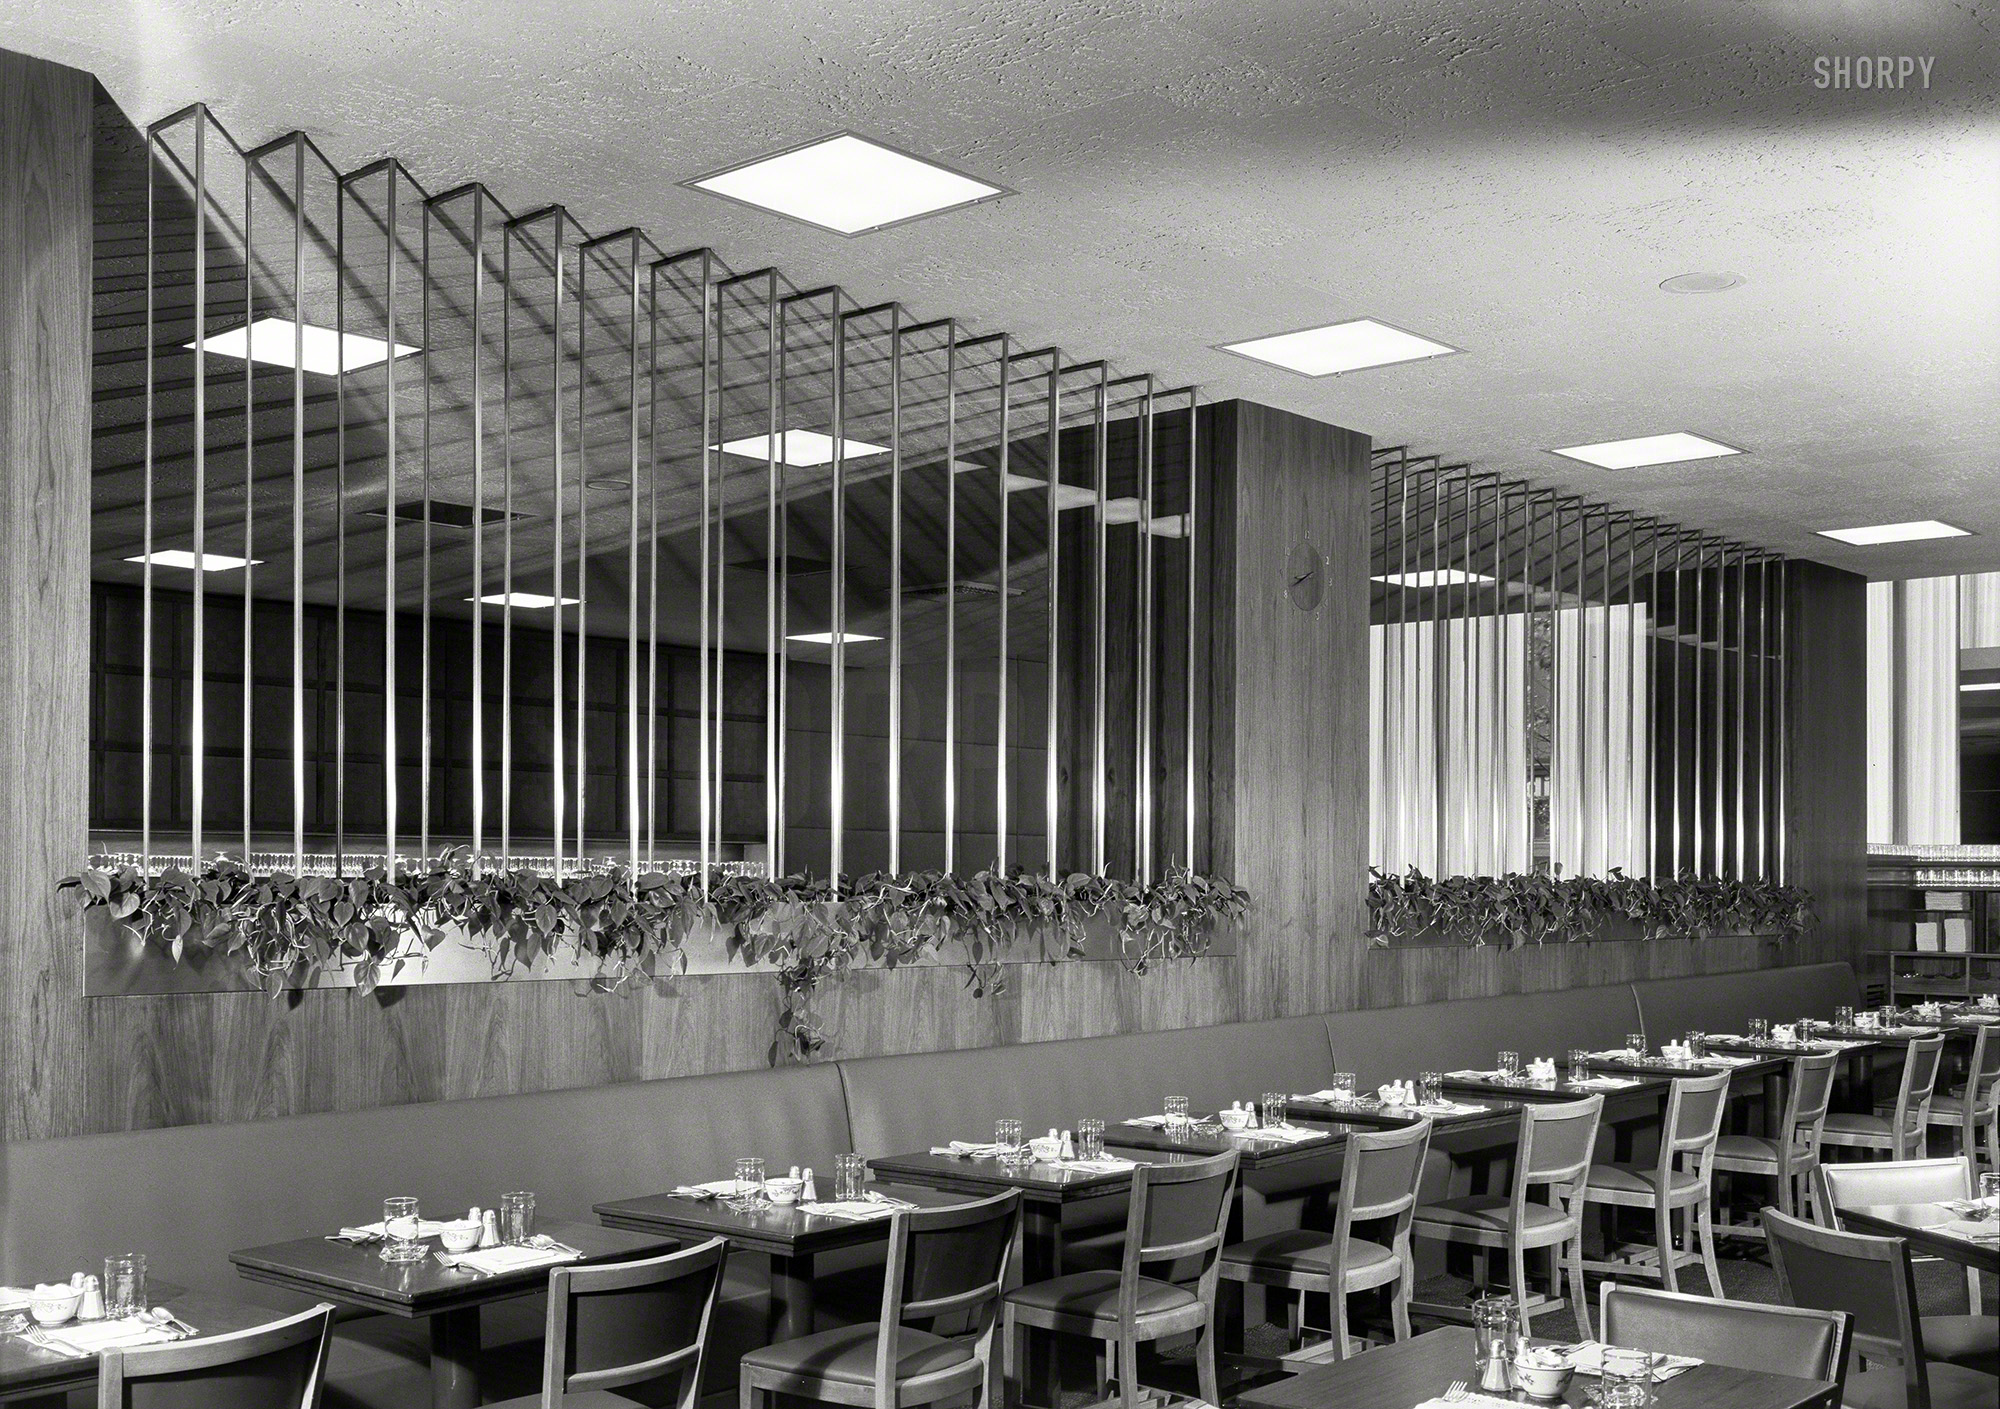 June 9, 1948. "Schrafft's, Esso Building, Rockefeller Center, New York. Glass louvers, main dining room. Carson & Lundin, architect." The exterior seen here. Large-format acetate negative by Gottscho-Schleisner. View full size.